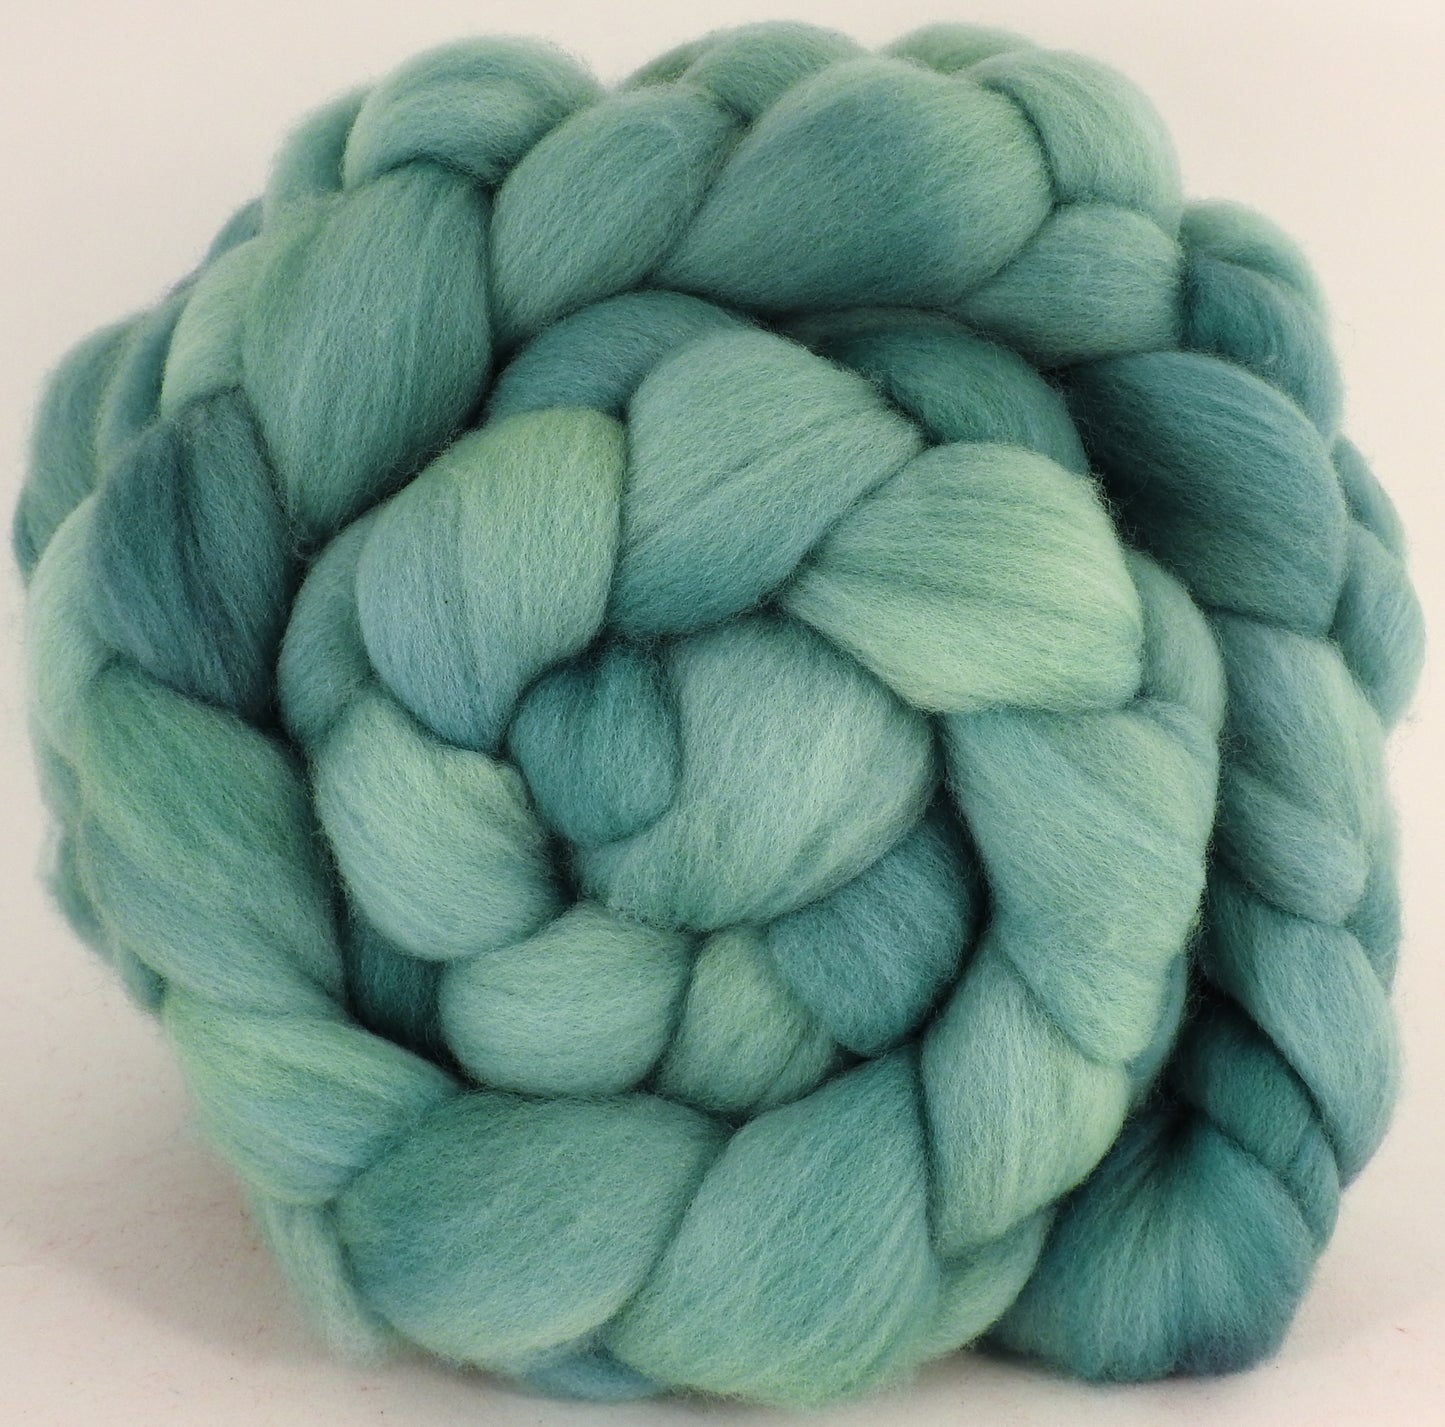 Hand dyed top for spinning - Spearmint - Organic Polwarth - Inglenook Fibers